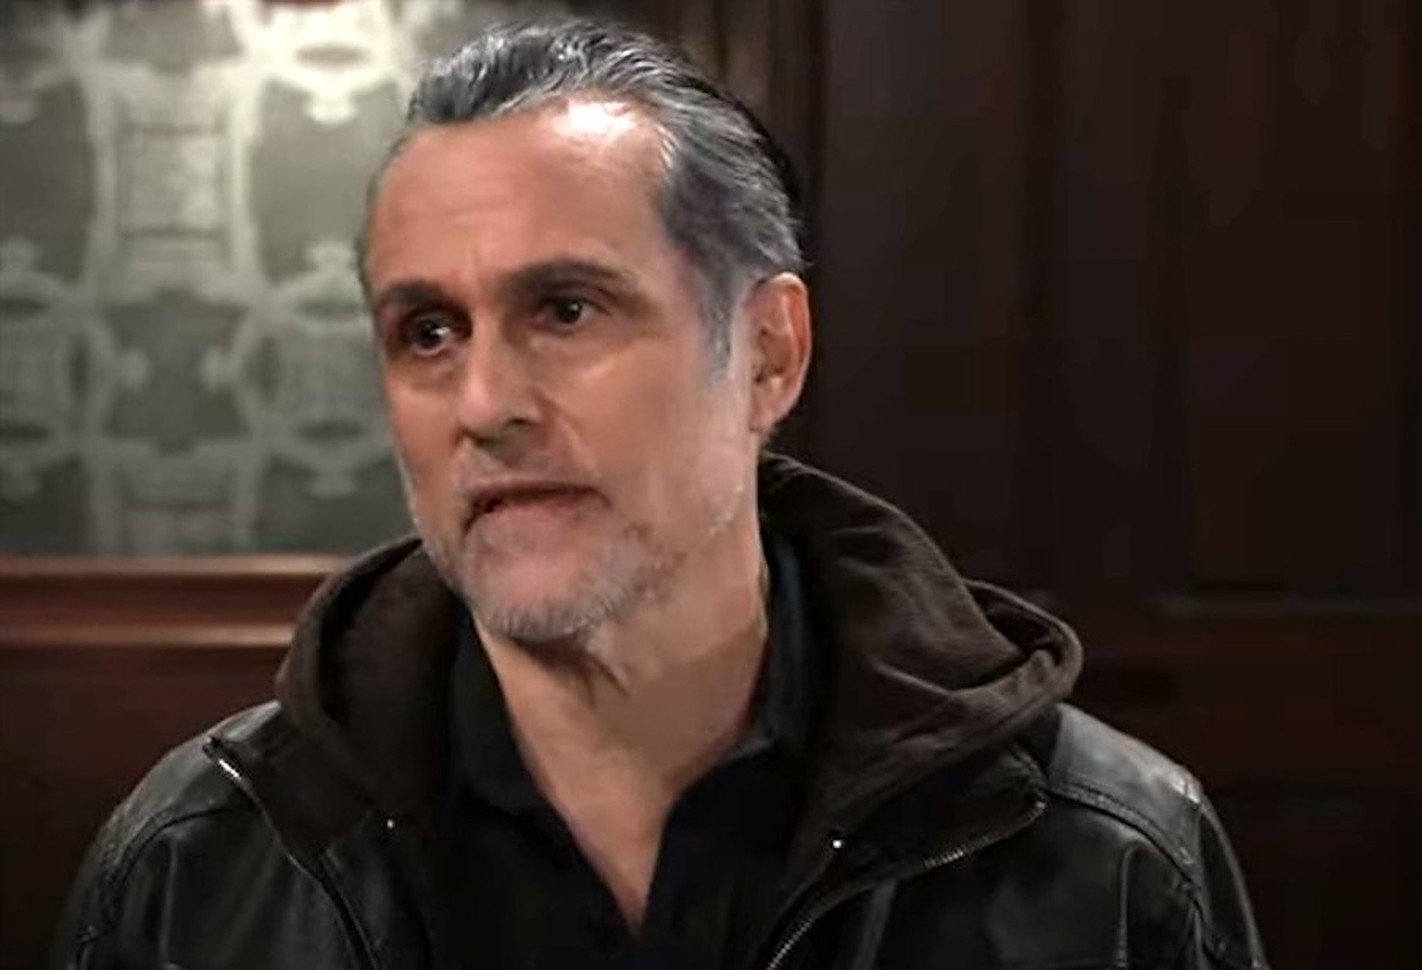 GH/Sonny (Maurice Bernard) comes to take care of Riley